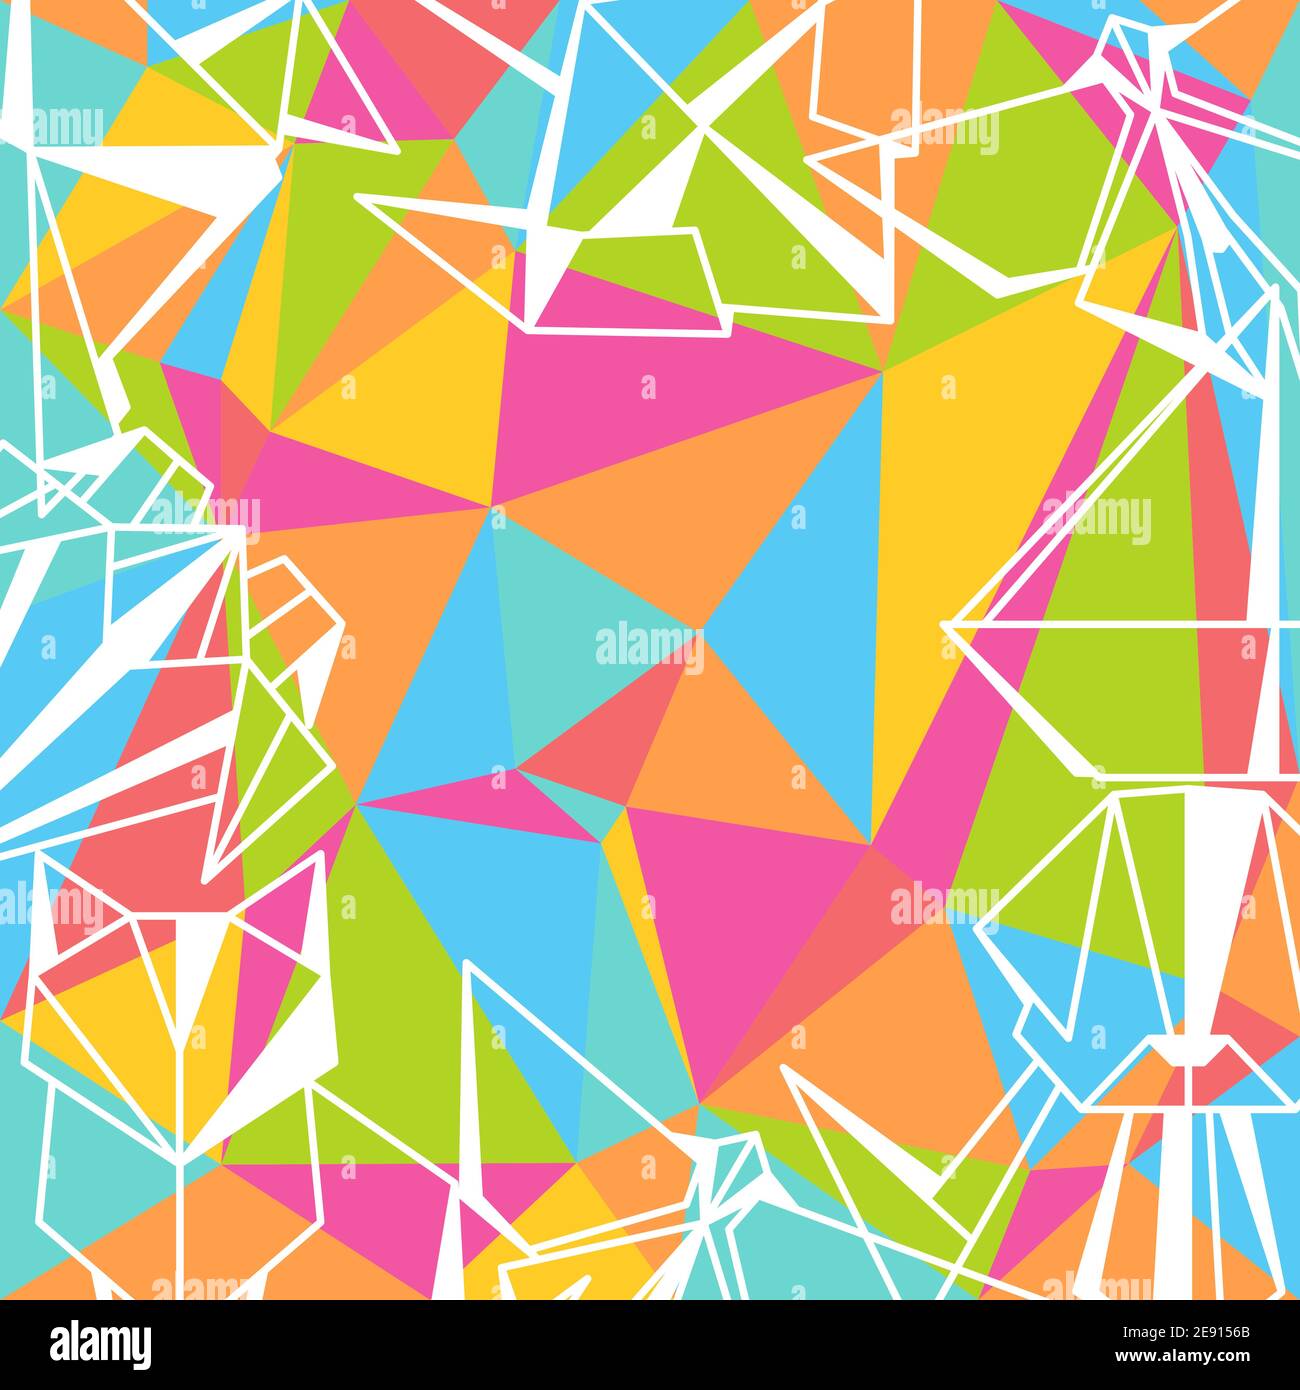 Background with origami toys. Stock Vector